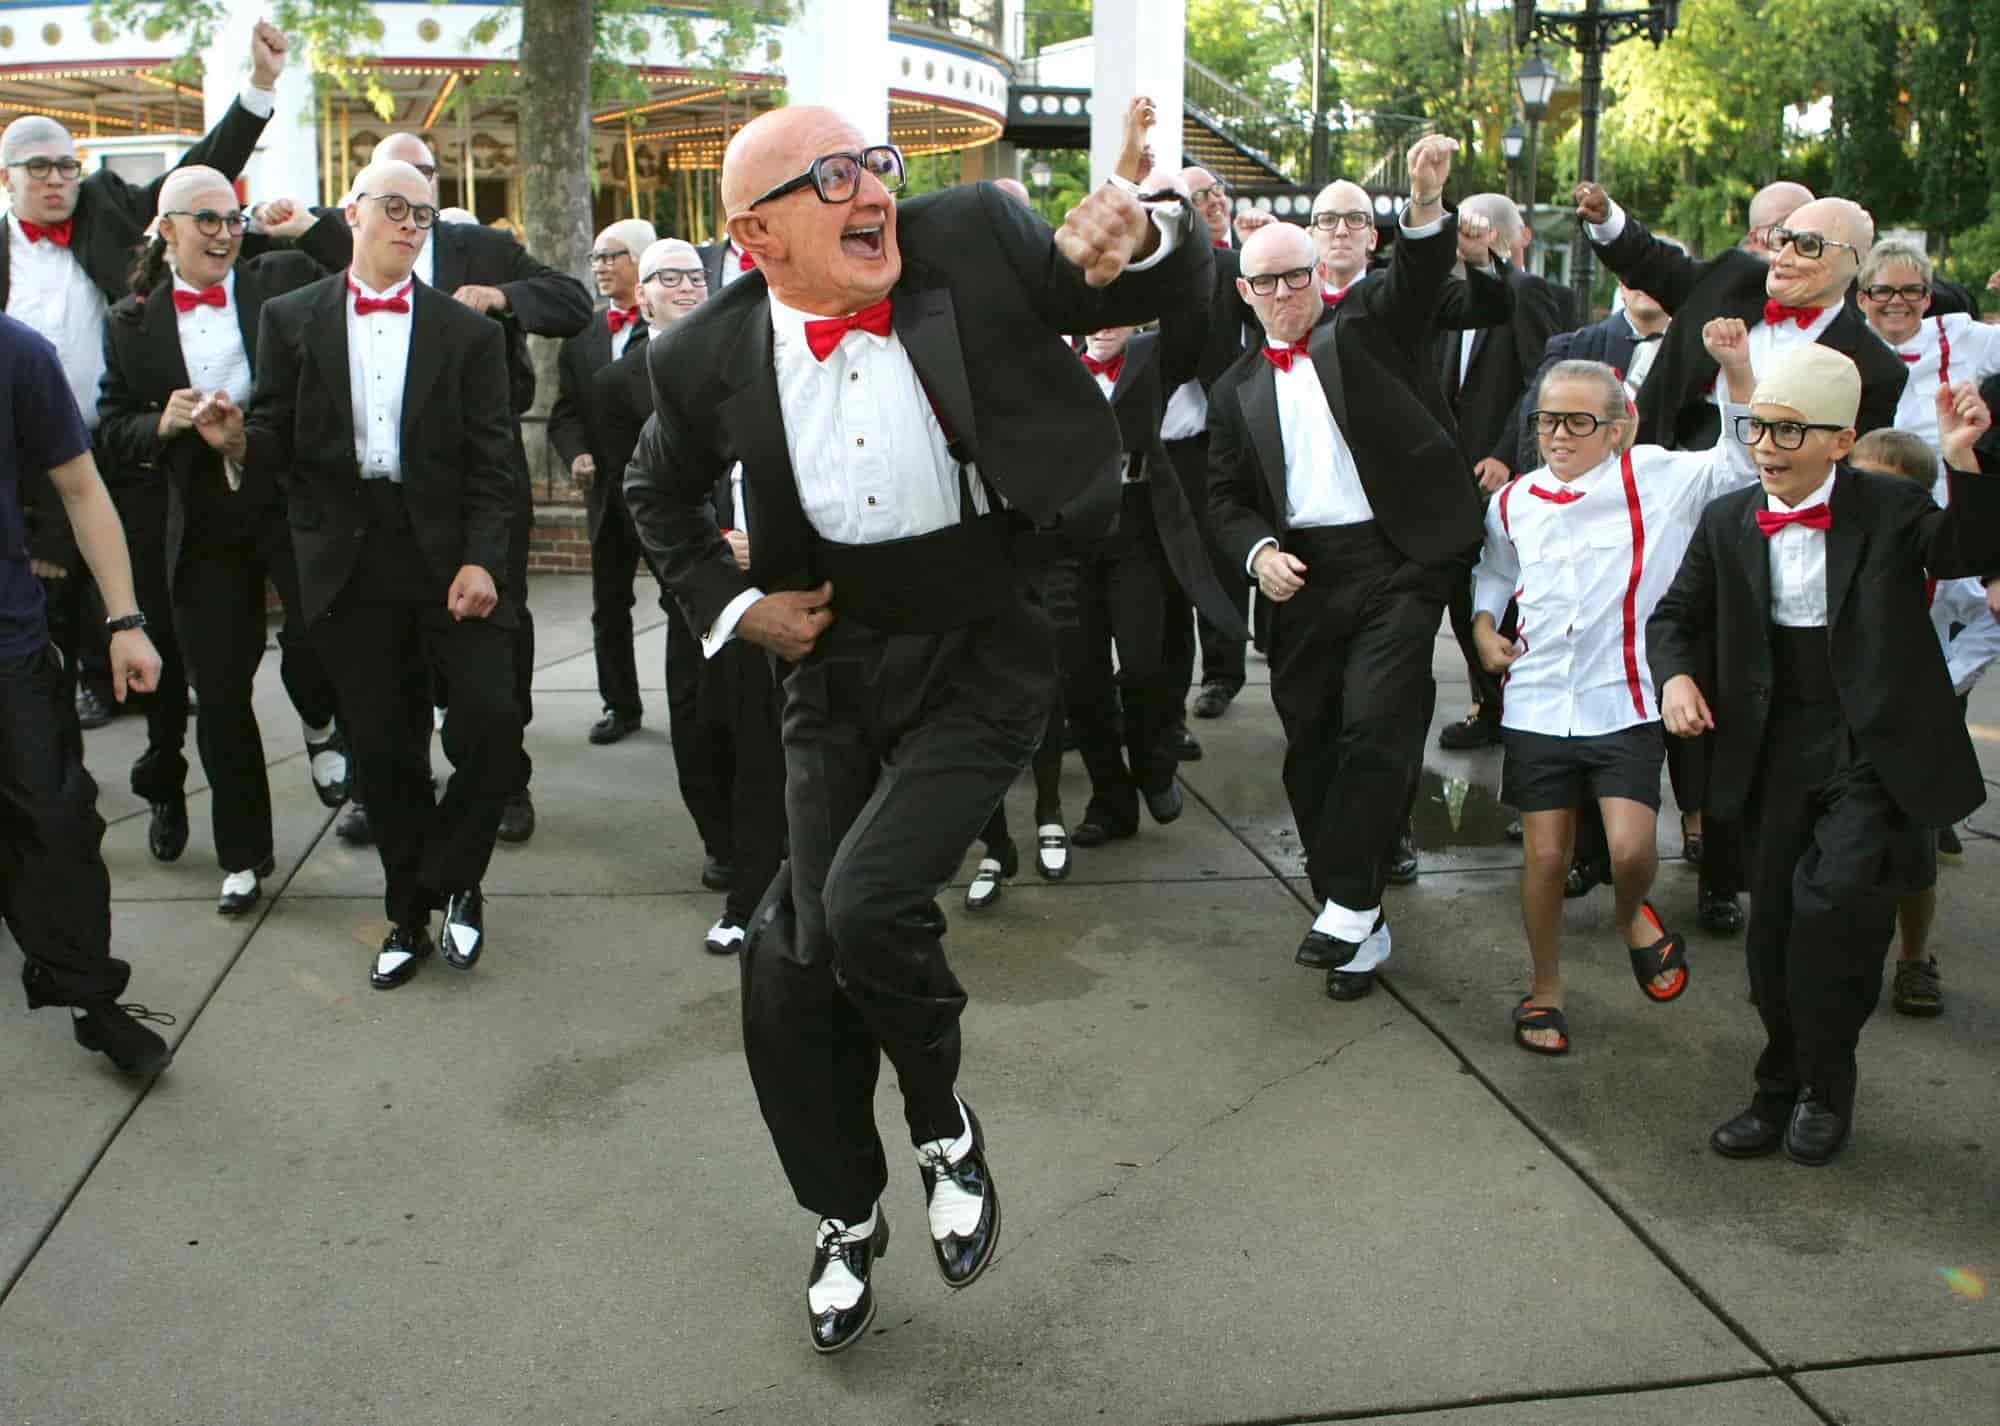 The old Six Flags man dancing with a bunch of people dressed up like him